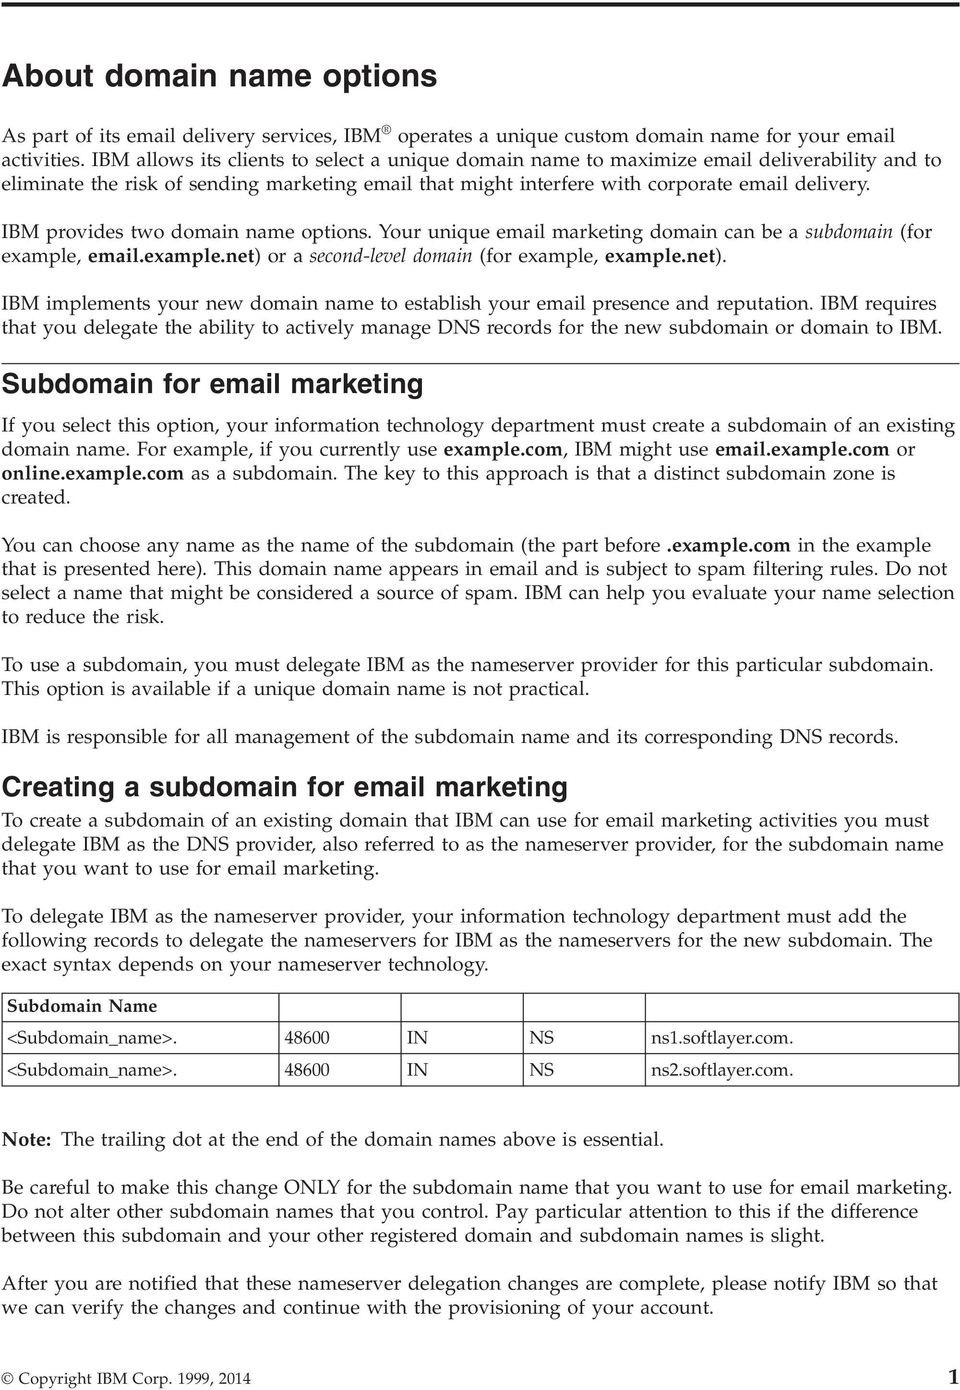 IBM provides two domain name options. Your unique email marketing domain can be a subdomain (for example, email.example.net) 